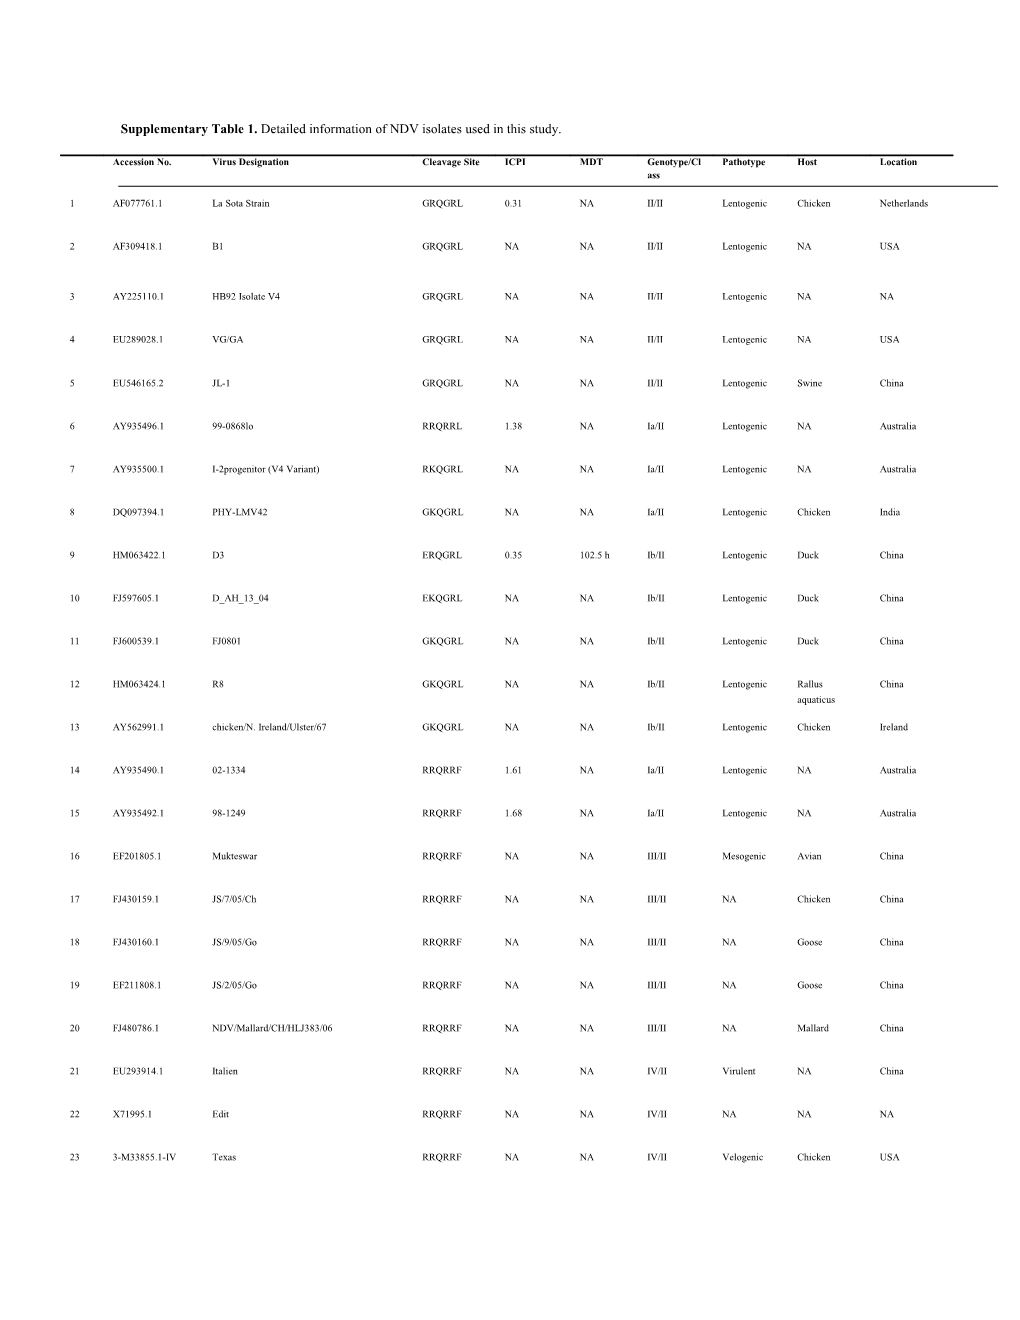 Supplementary Table 1. Detailed Information of NDV Isolates Used in This Study